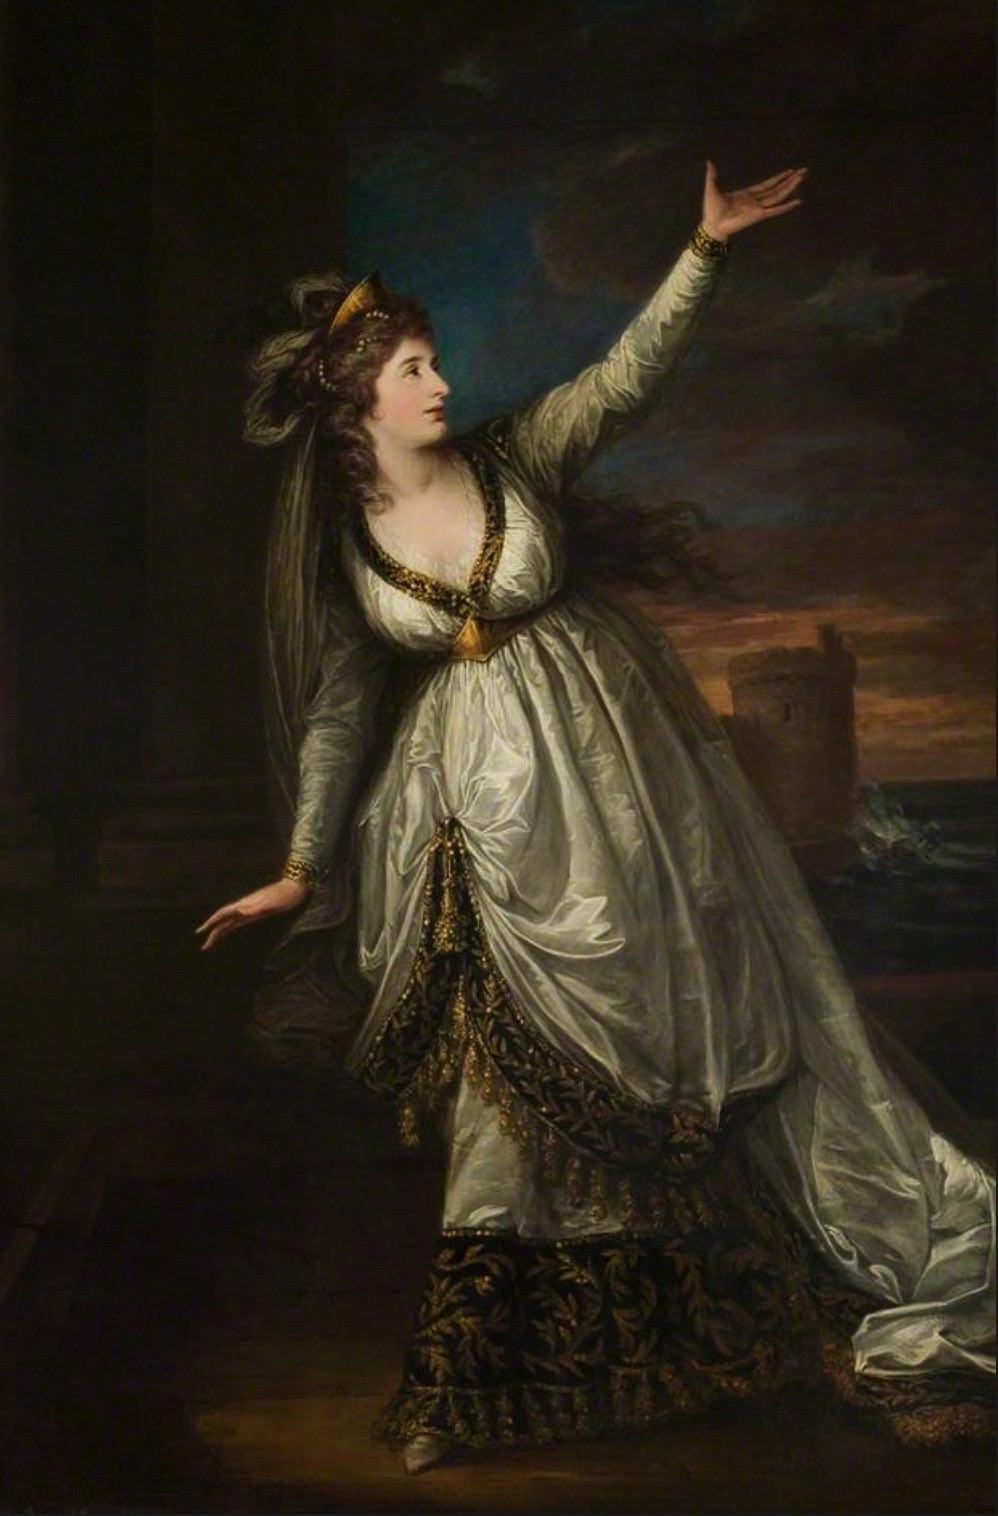 1784, oil on canvas, 270 × 155 cm. Collection of Stratford-upon-Avon Town Hall ( TH14).